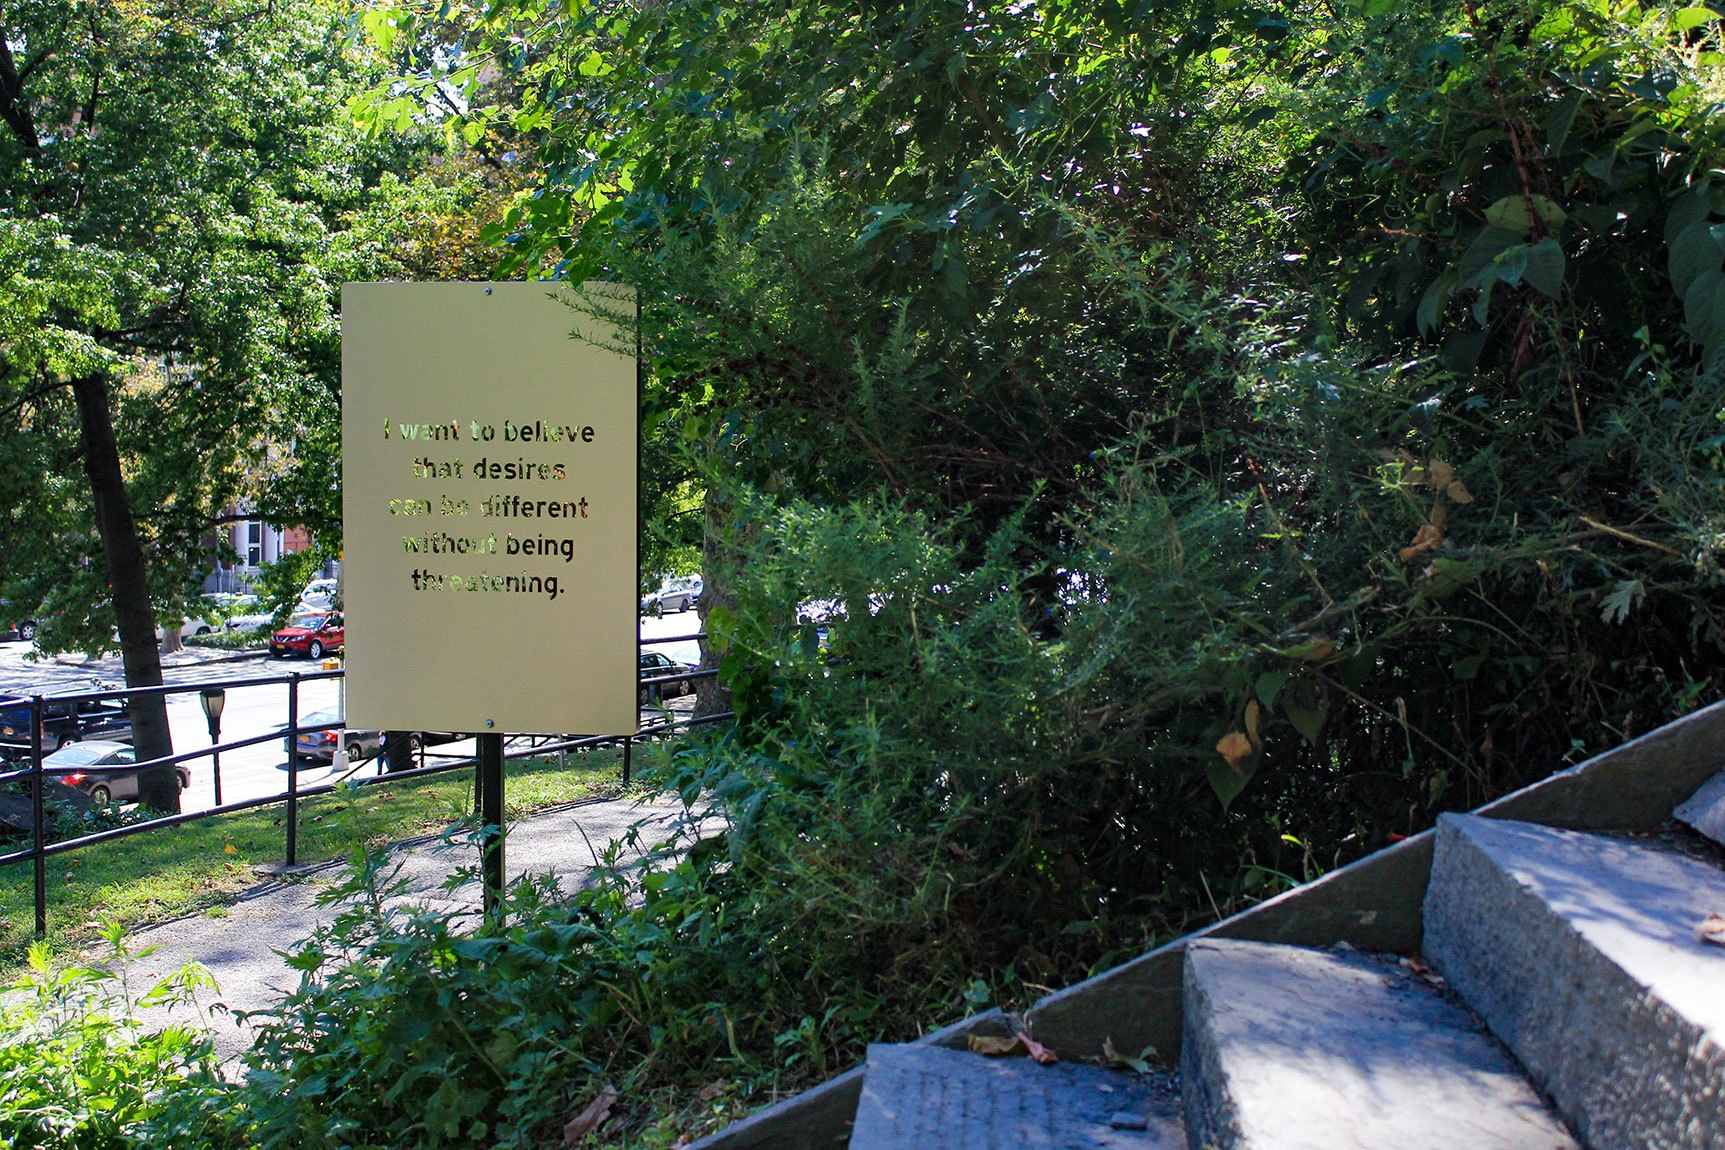 Chloë Bass' mirrored lettering piece, "I want to believe that desires can be different without being threatening. The part of you that says 'I can share myself with strangers.'" The piece is installed beside a sidewalk, surrounded by trees.